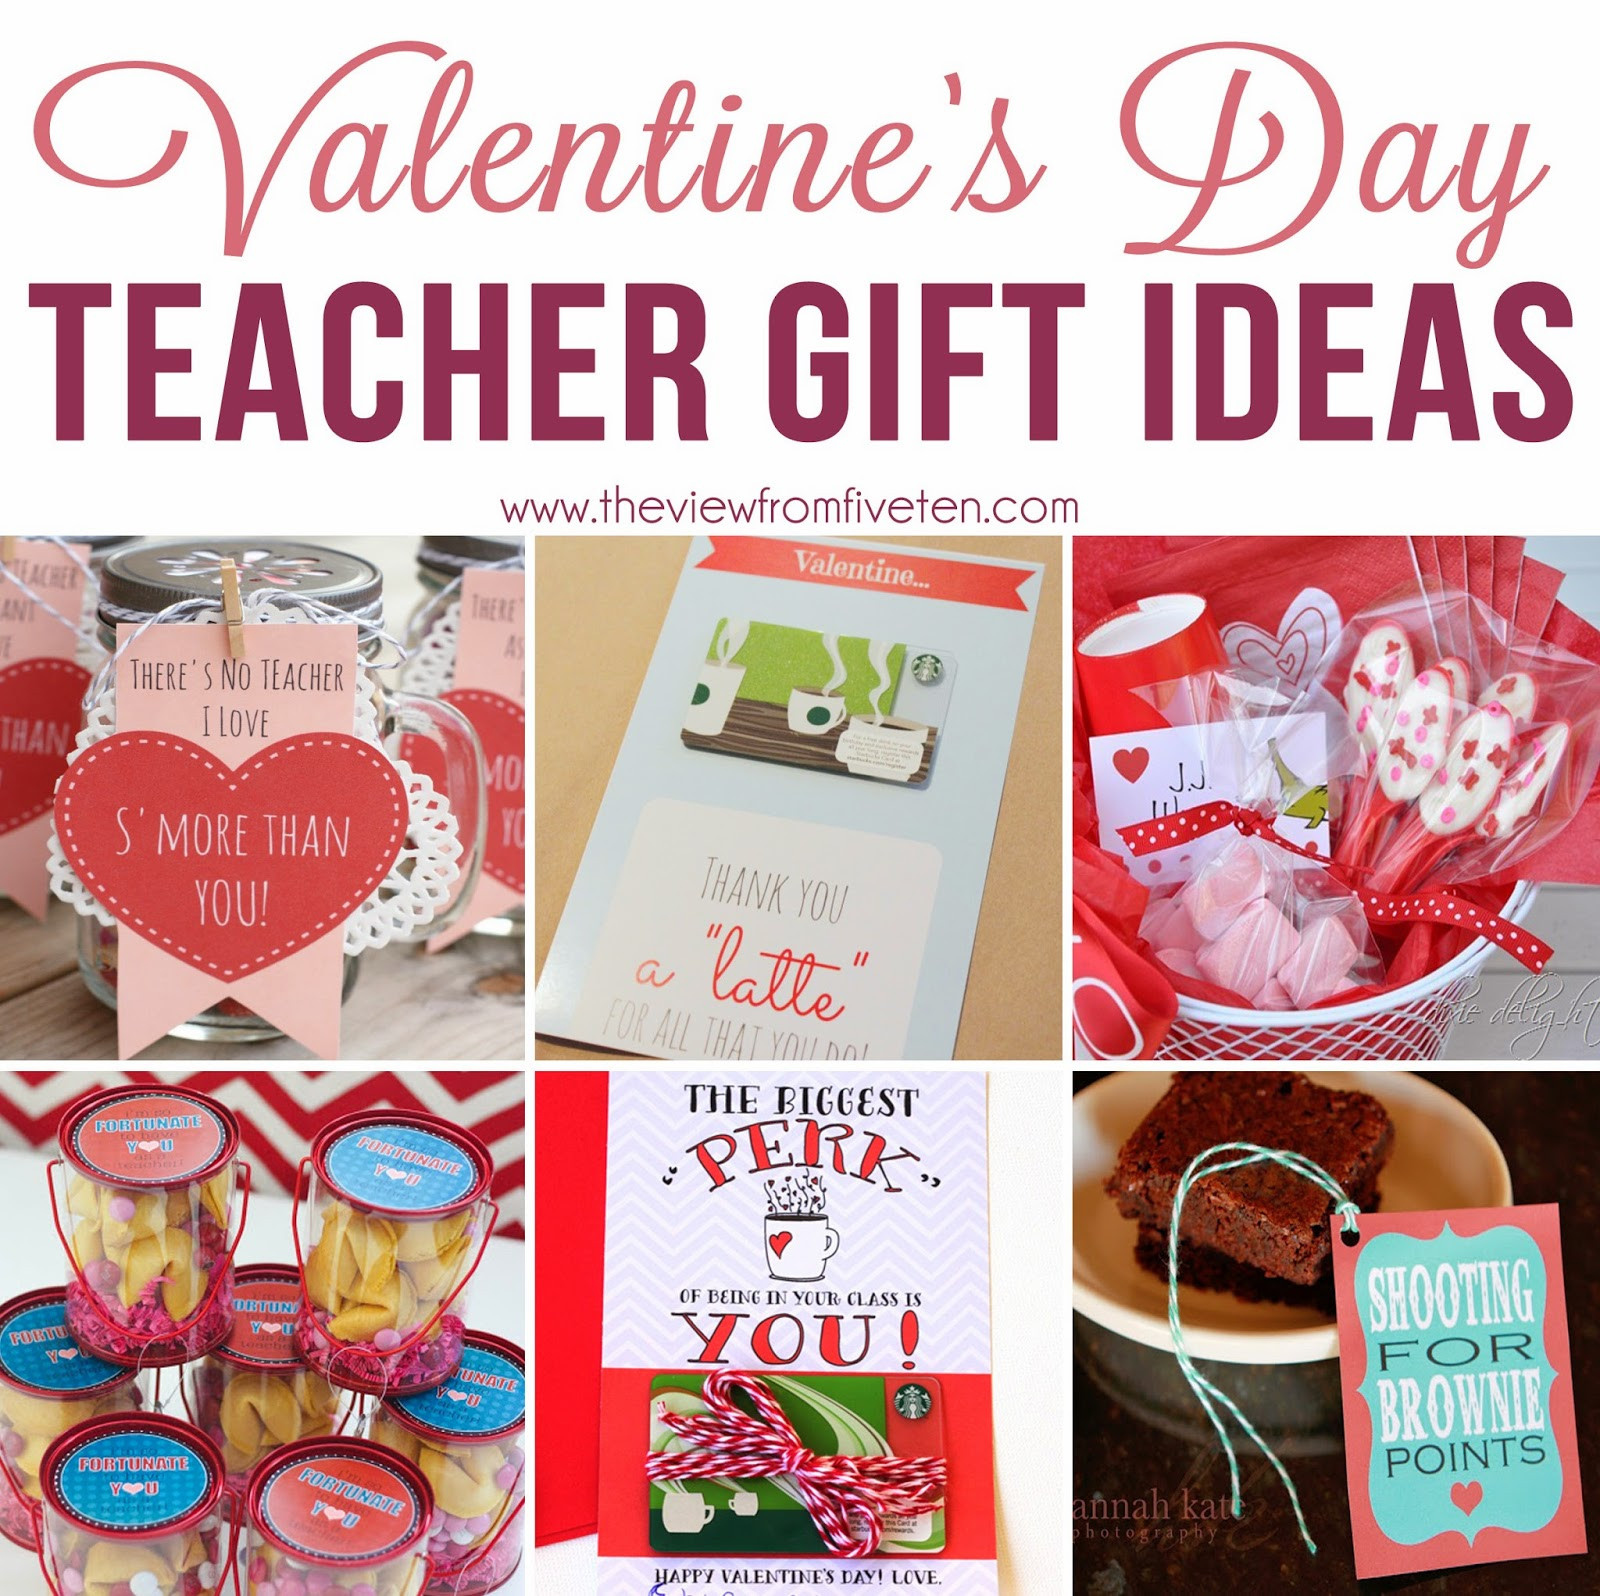 Valentines Teacher Gift Ideas
 Valentine s Day Gift Ideas for Teachers Wholehearted